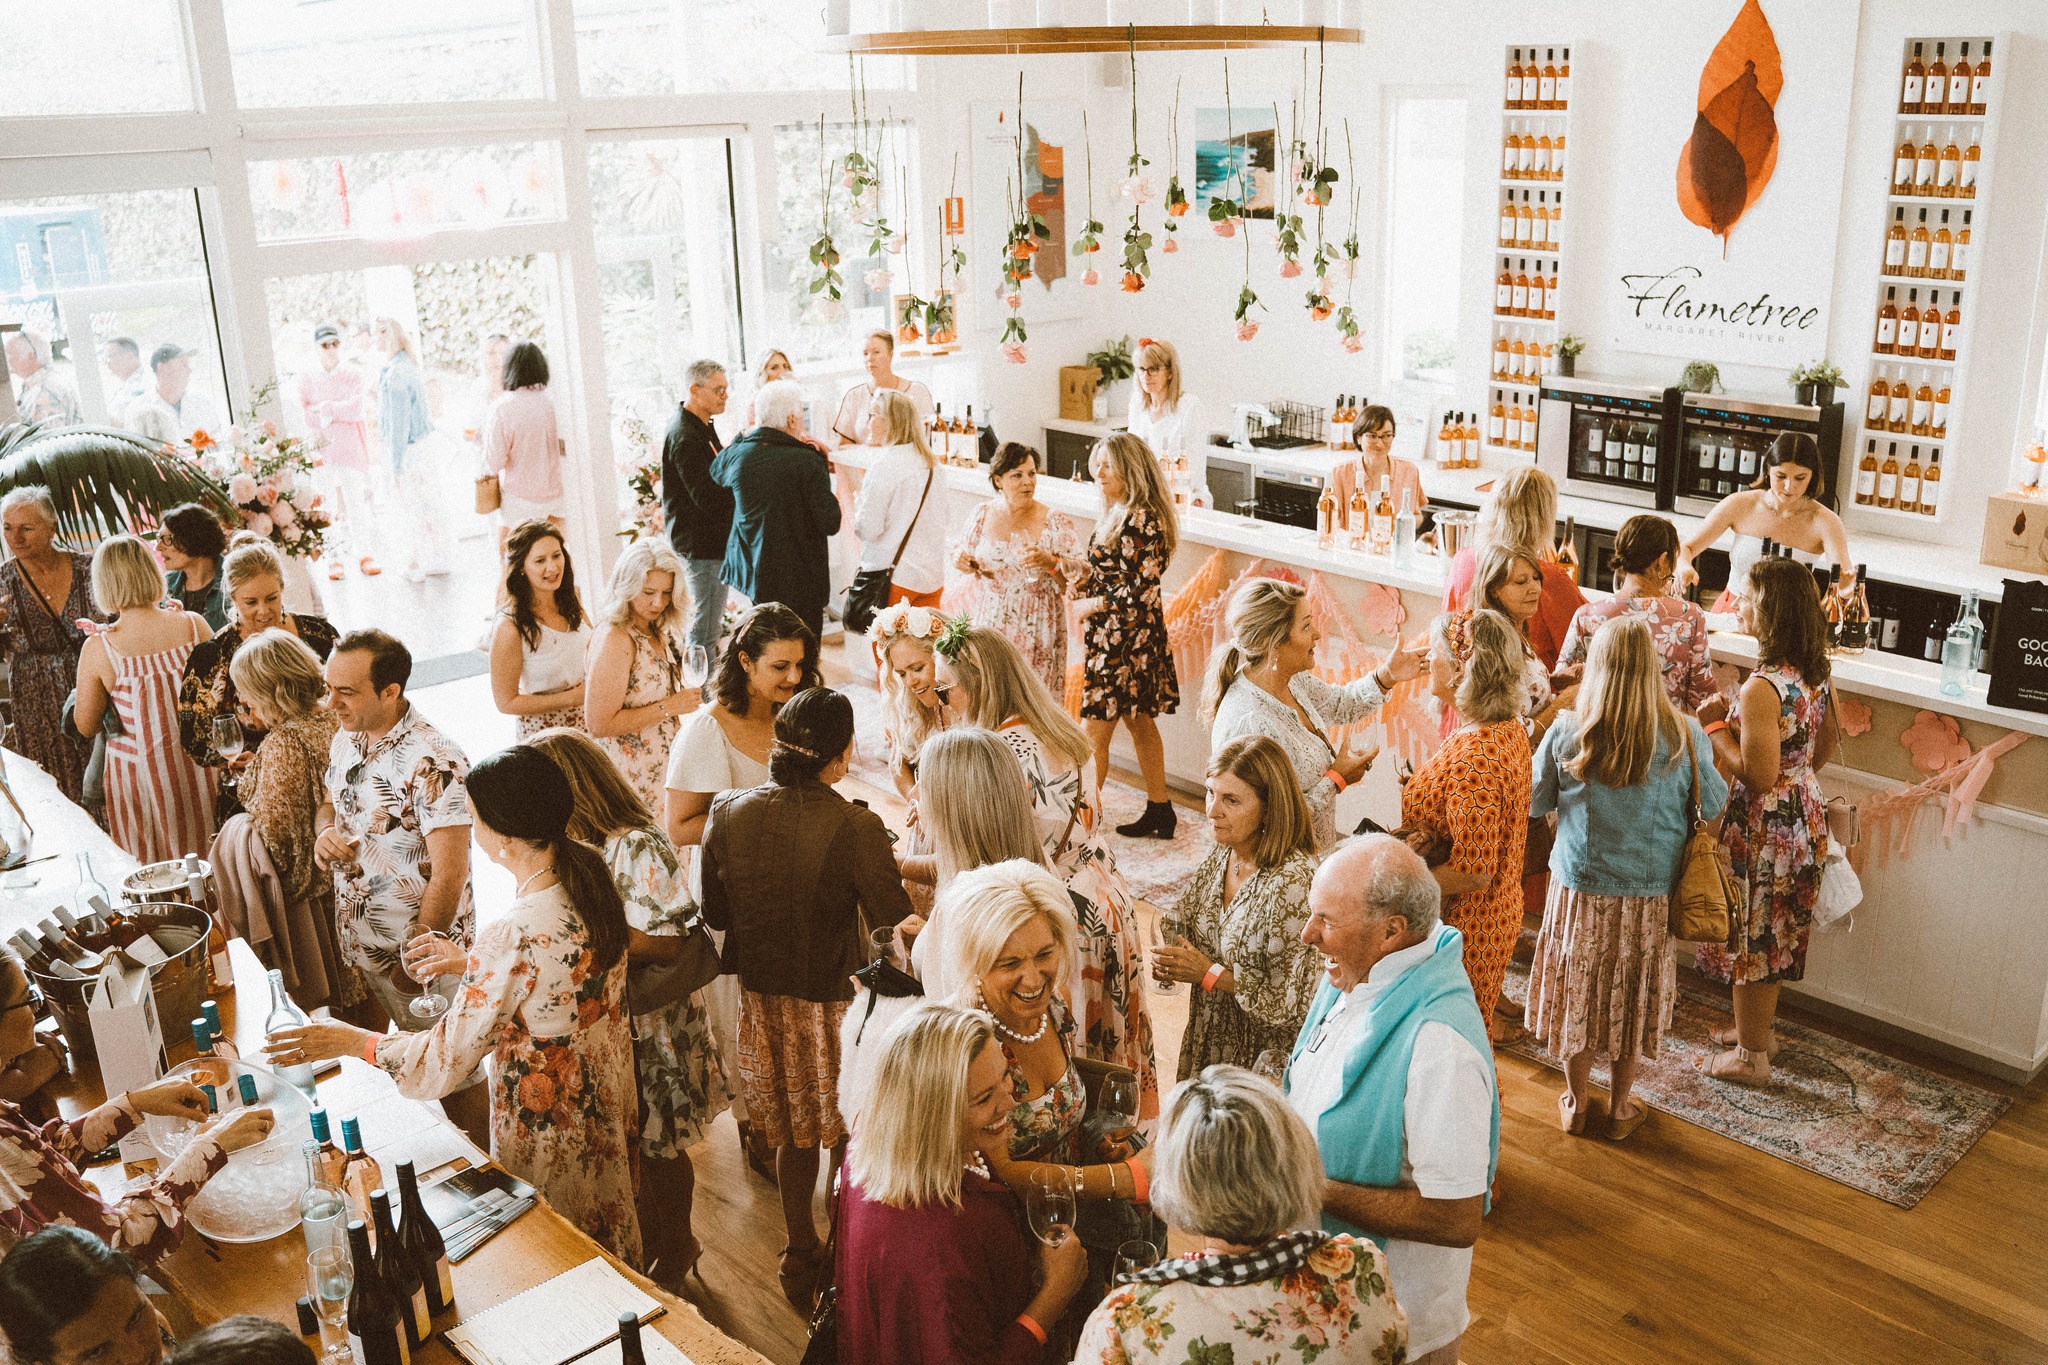 Wine And Unwind: The Latest News From Fine Vines Festival 2022 At Margaret River, Western Australia